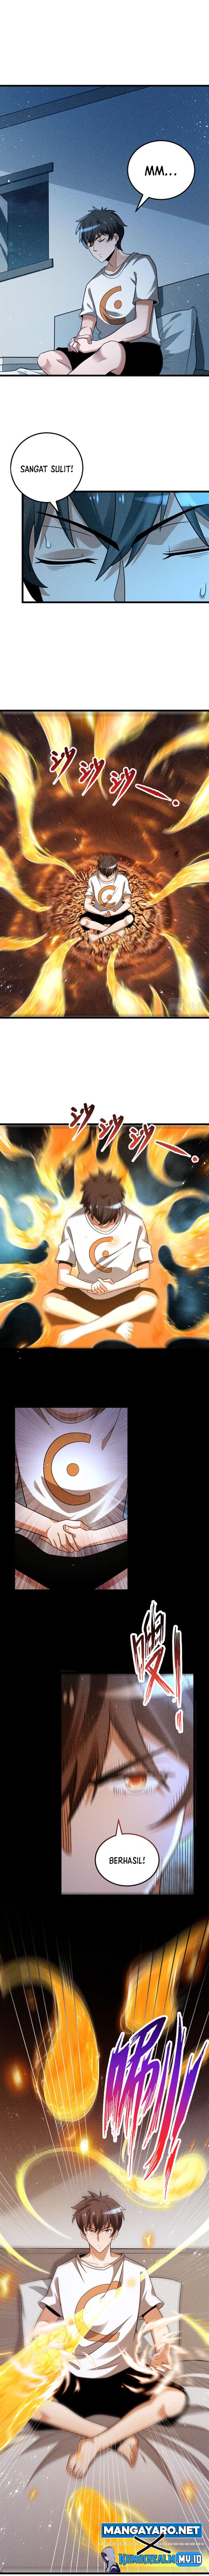 Due To Outburst Of Spiritual Energy, I Have No Choice But To Awaken As A God Chapter 5